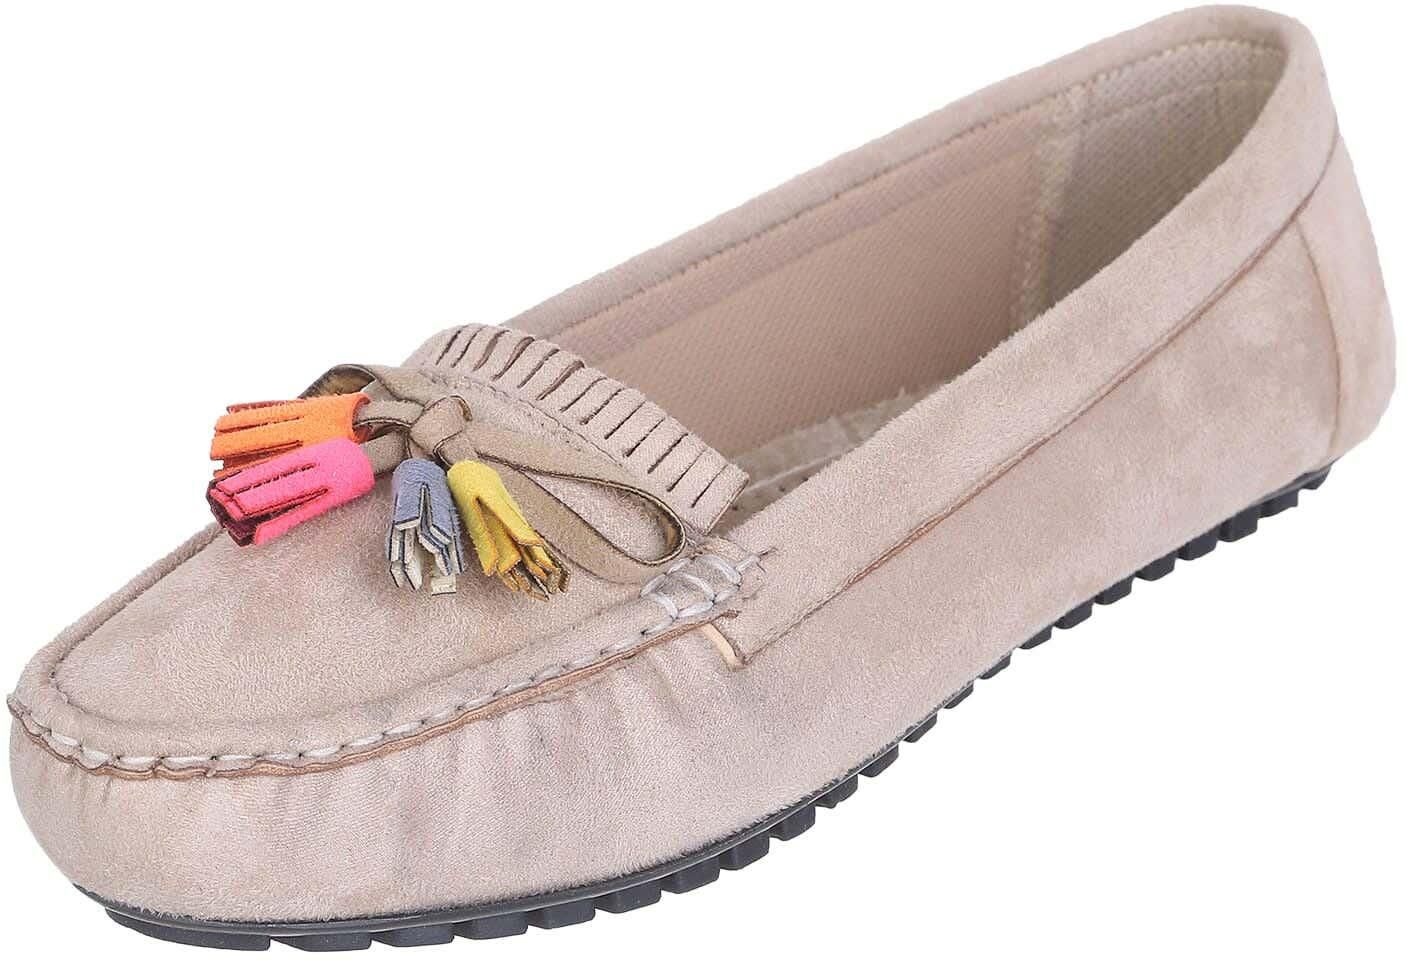 Get Suede Flat Shoes for Women with best offers | Raneen.com